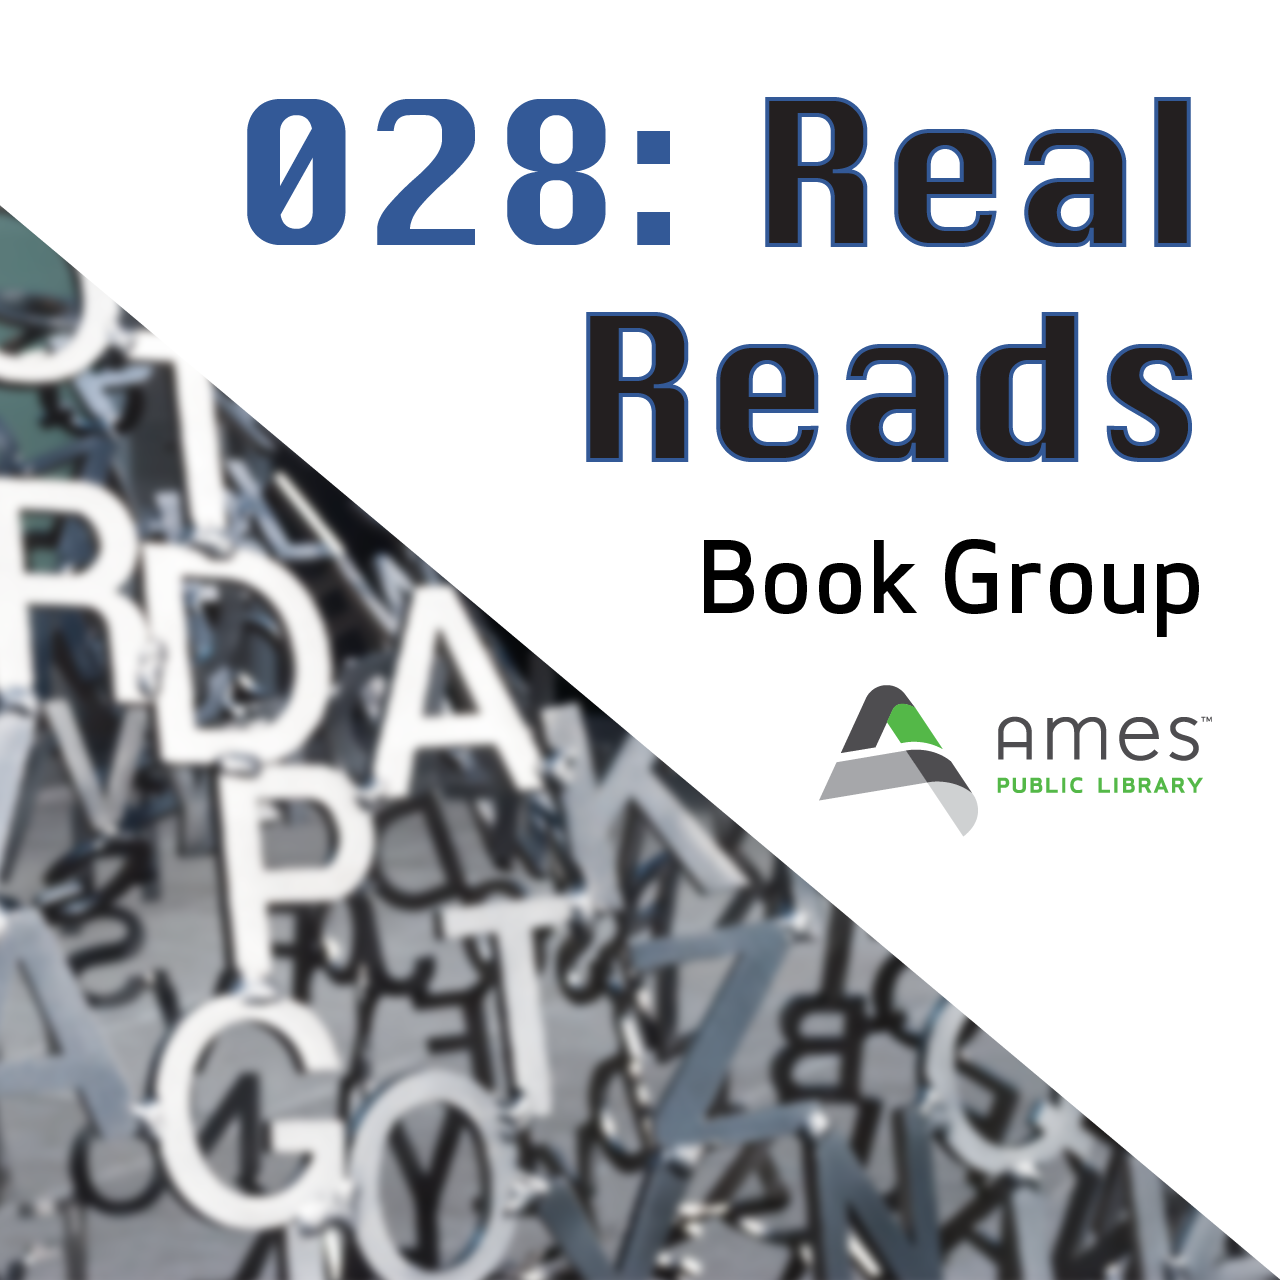 028: Real Reads Book Group